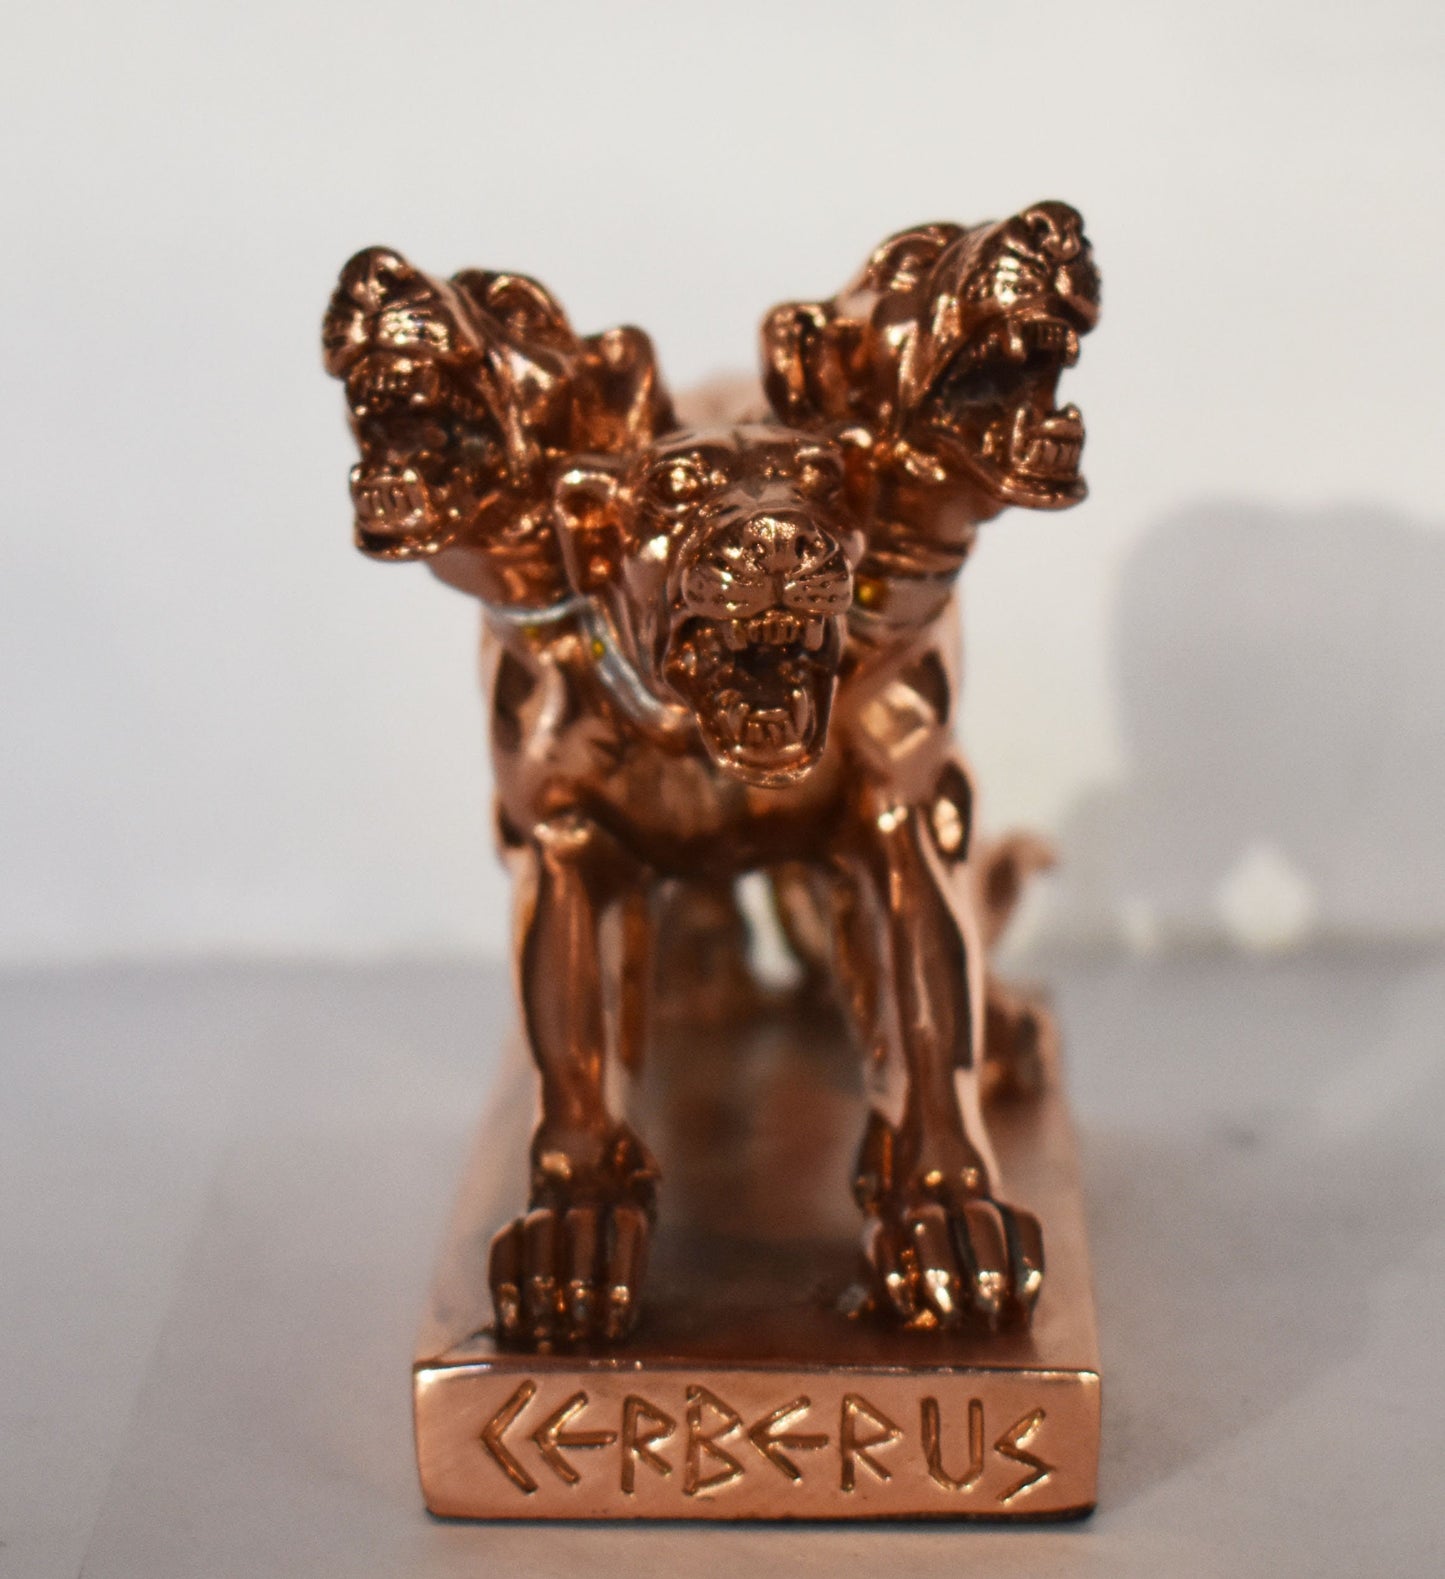 Cerberus -Three-Headed Dog of Hades - Guardian of the Underworld - Prevent the Escape of the Shades of the Dead - Copper Plated Alabaster